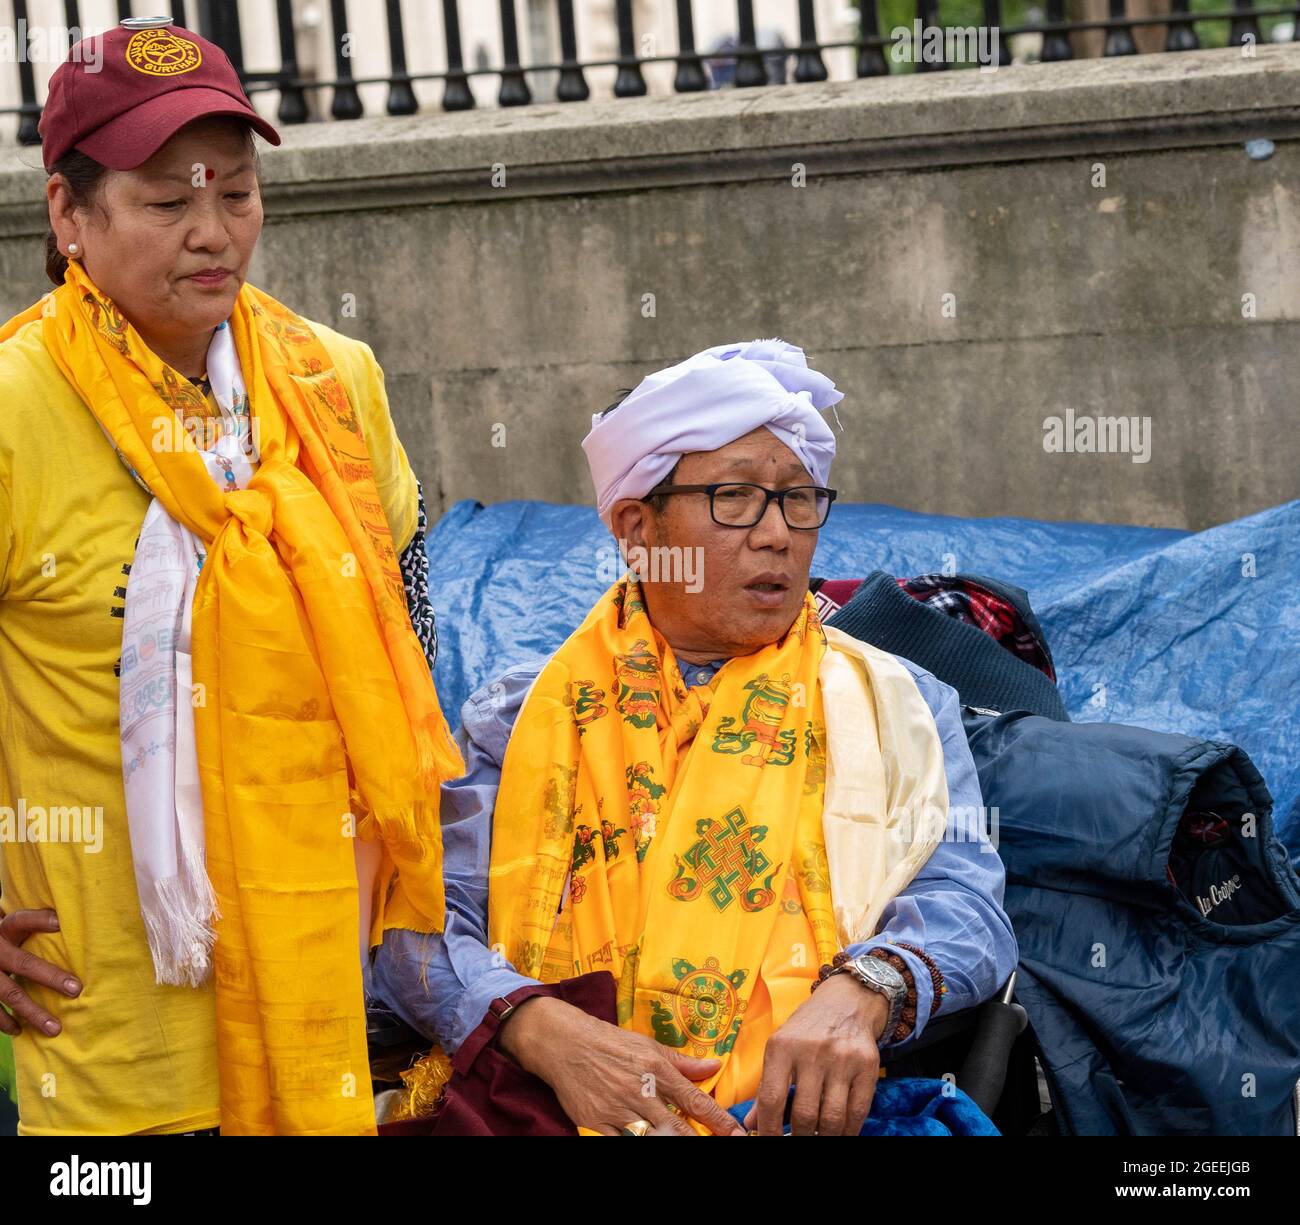 London, UK. 19th Aug, 2021. Former Gurkha soldiers have given up their 13 day hunger strike outside Downing Street, after the UK Government agreed to further talks. Credit: Ian Davidson/Alamy Live News Stock Photo